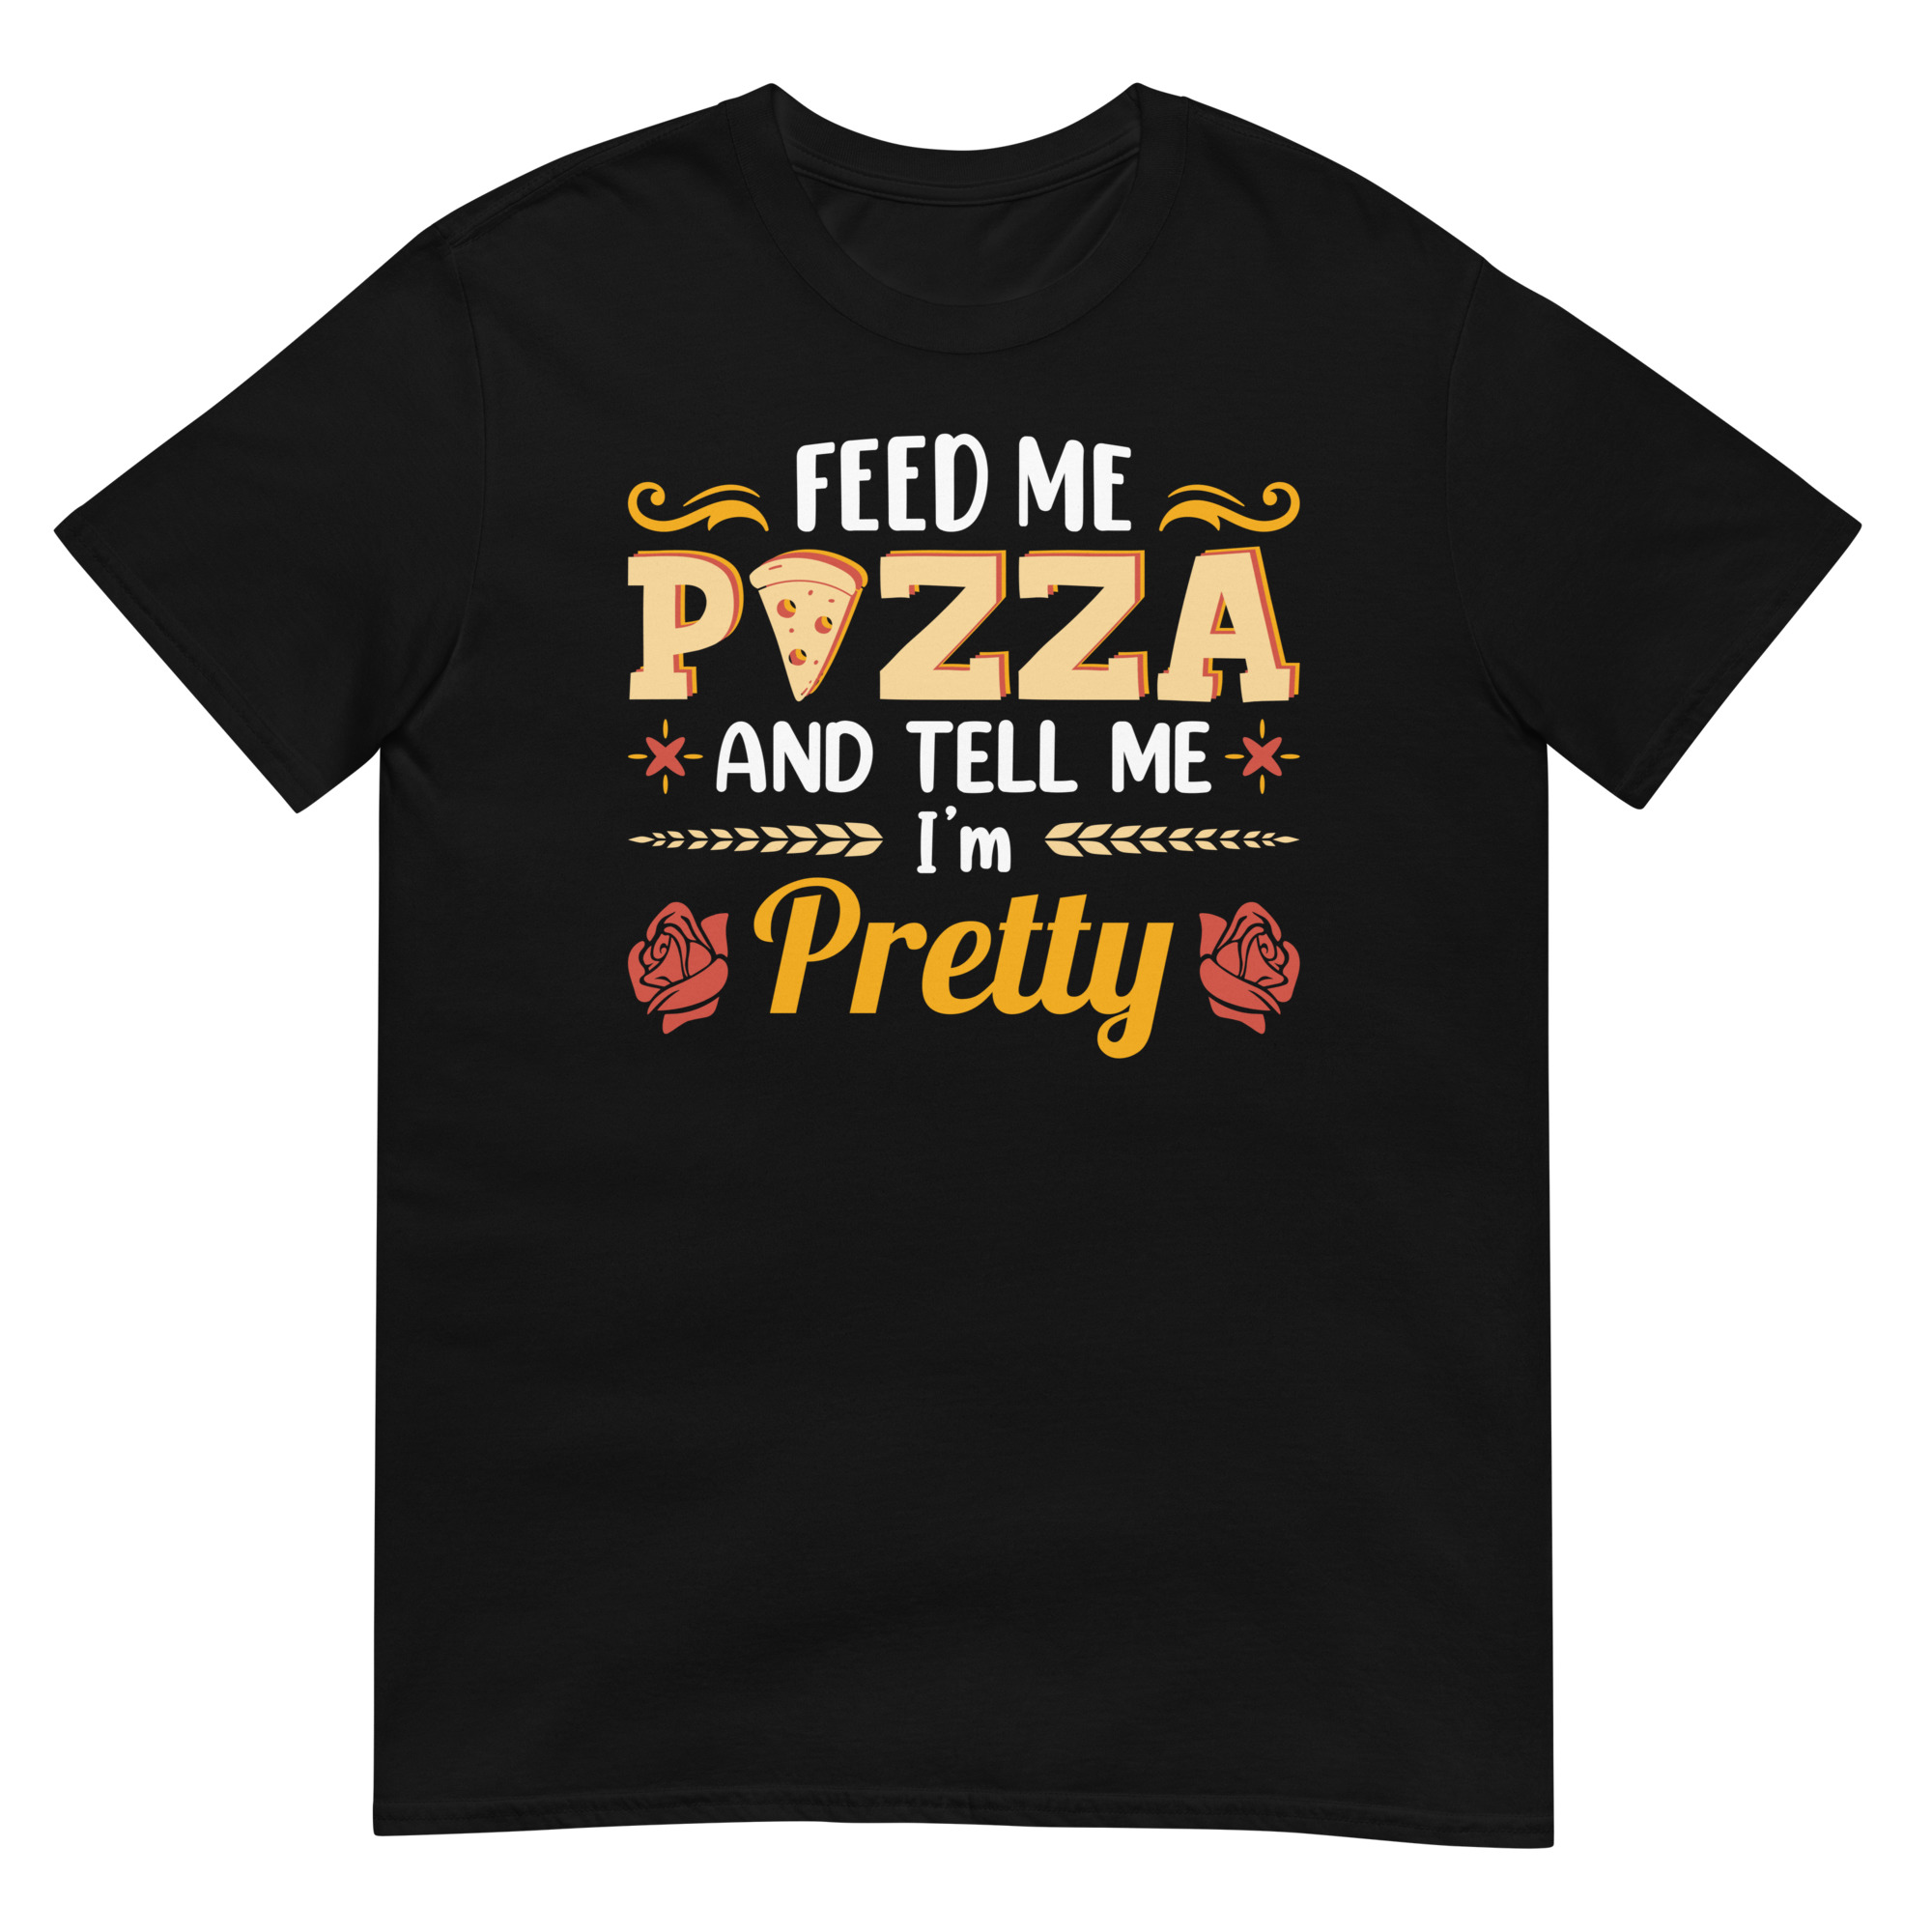 Feed Me Pizza And Tell Me I'm Pretty - Unisex Pizza T-Shirt